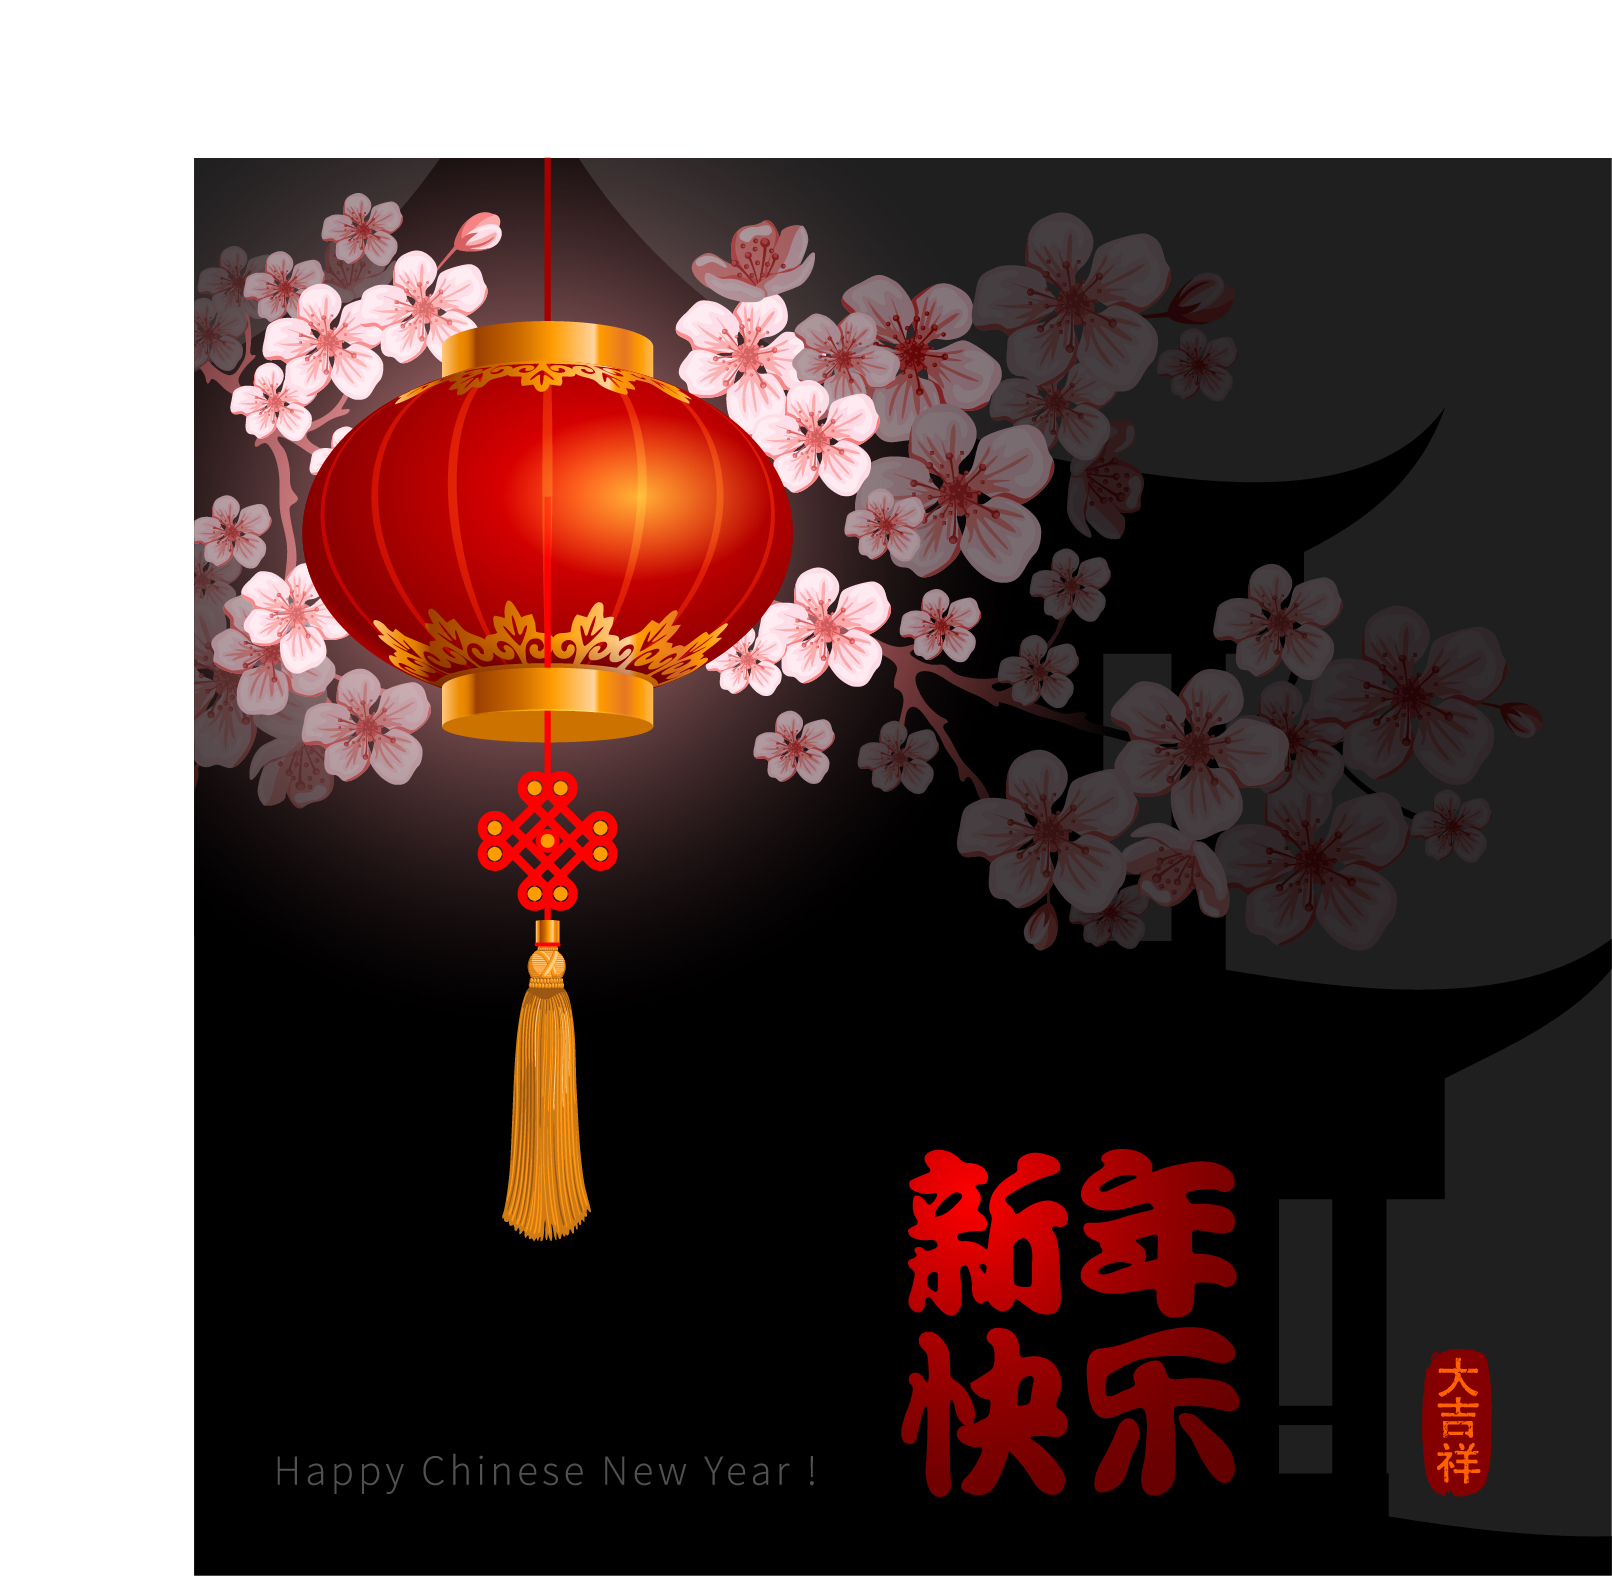 Chinese new year background with red lantern vector 02